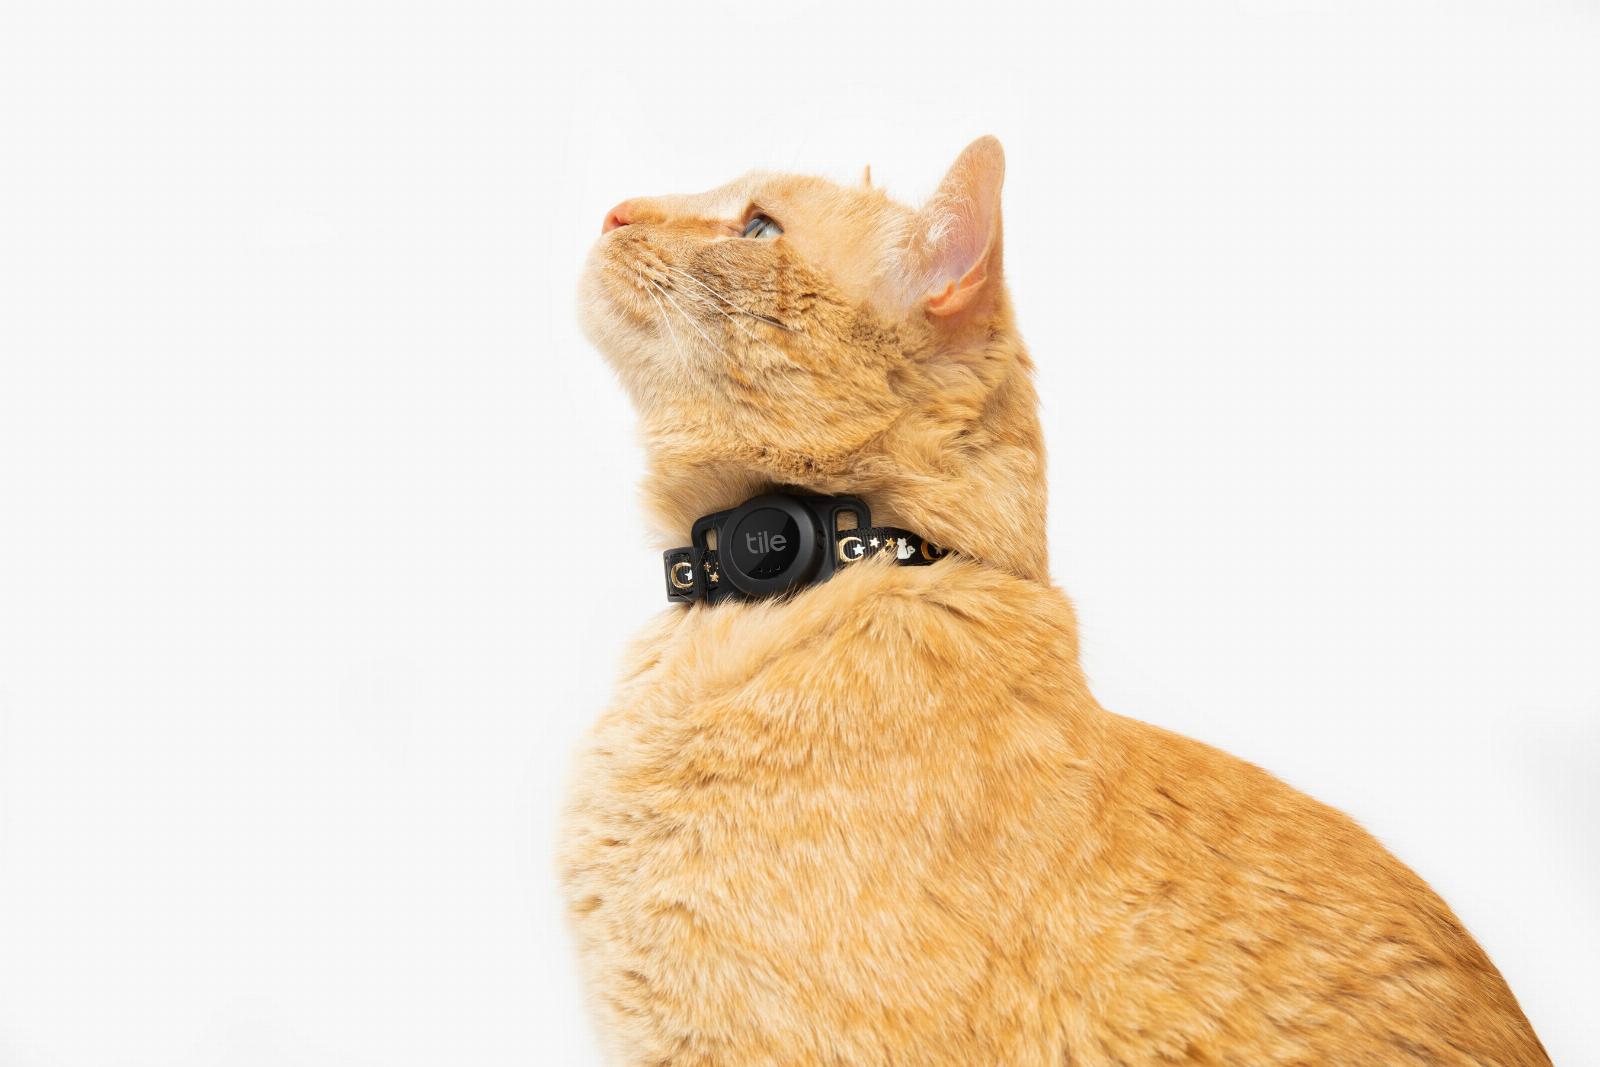 Tile launches a new cat tracking tag with three-year battery life